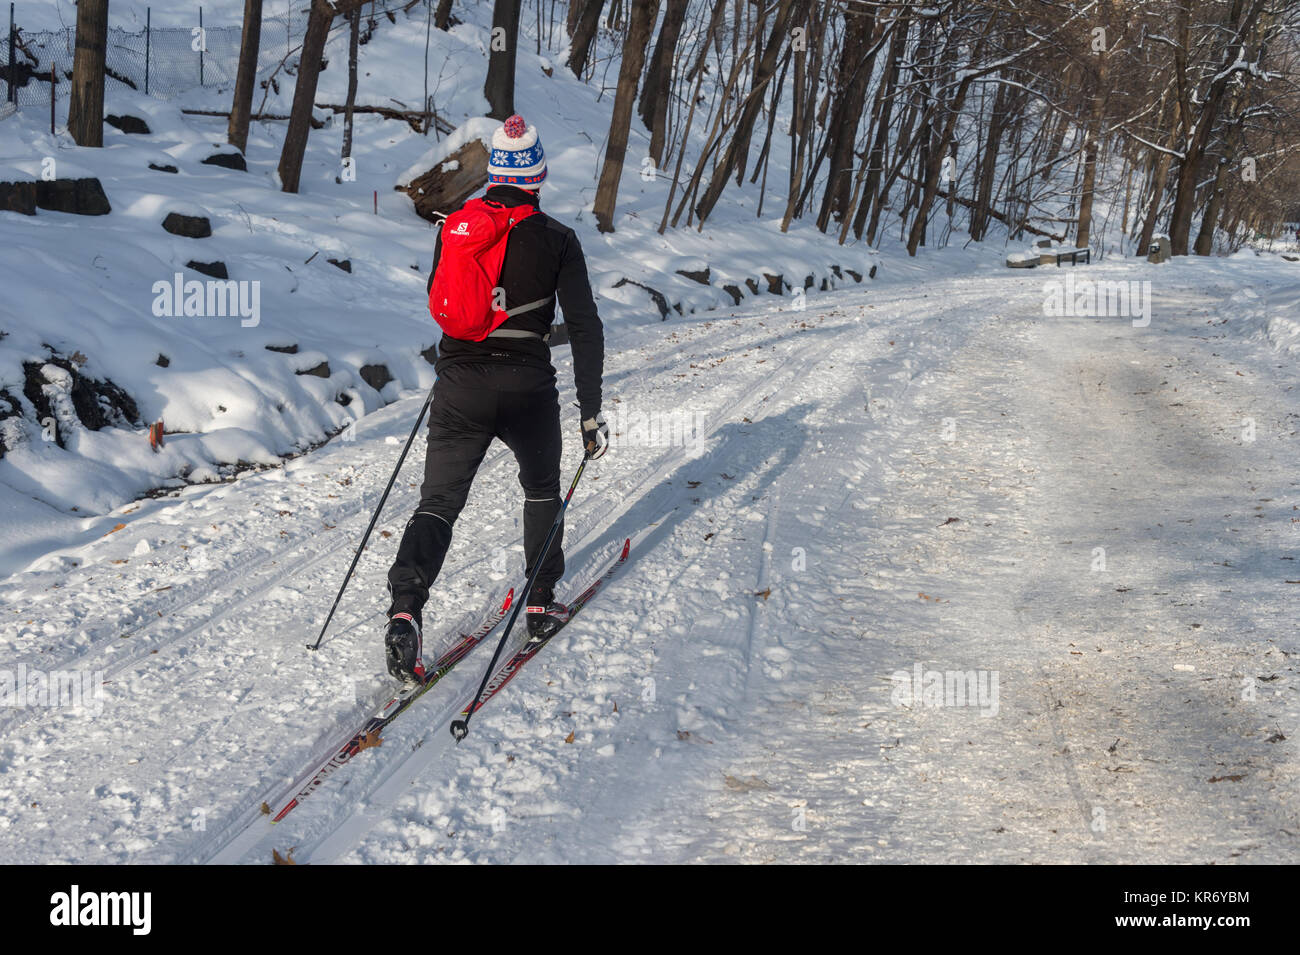 Montreal, CA - 17 December 2017: Cross country skier in the Mont Royal Park in winter. Stock Photo